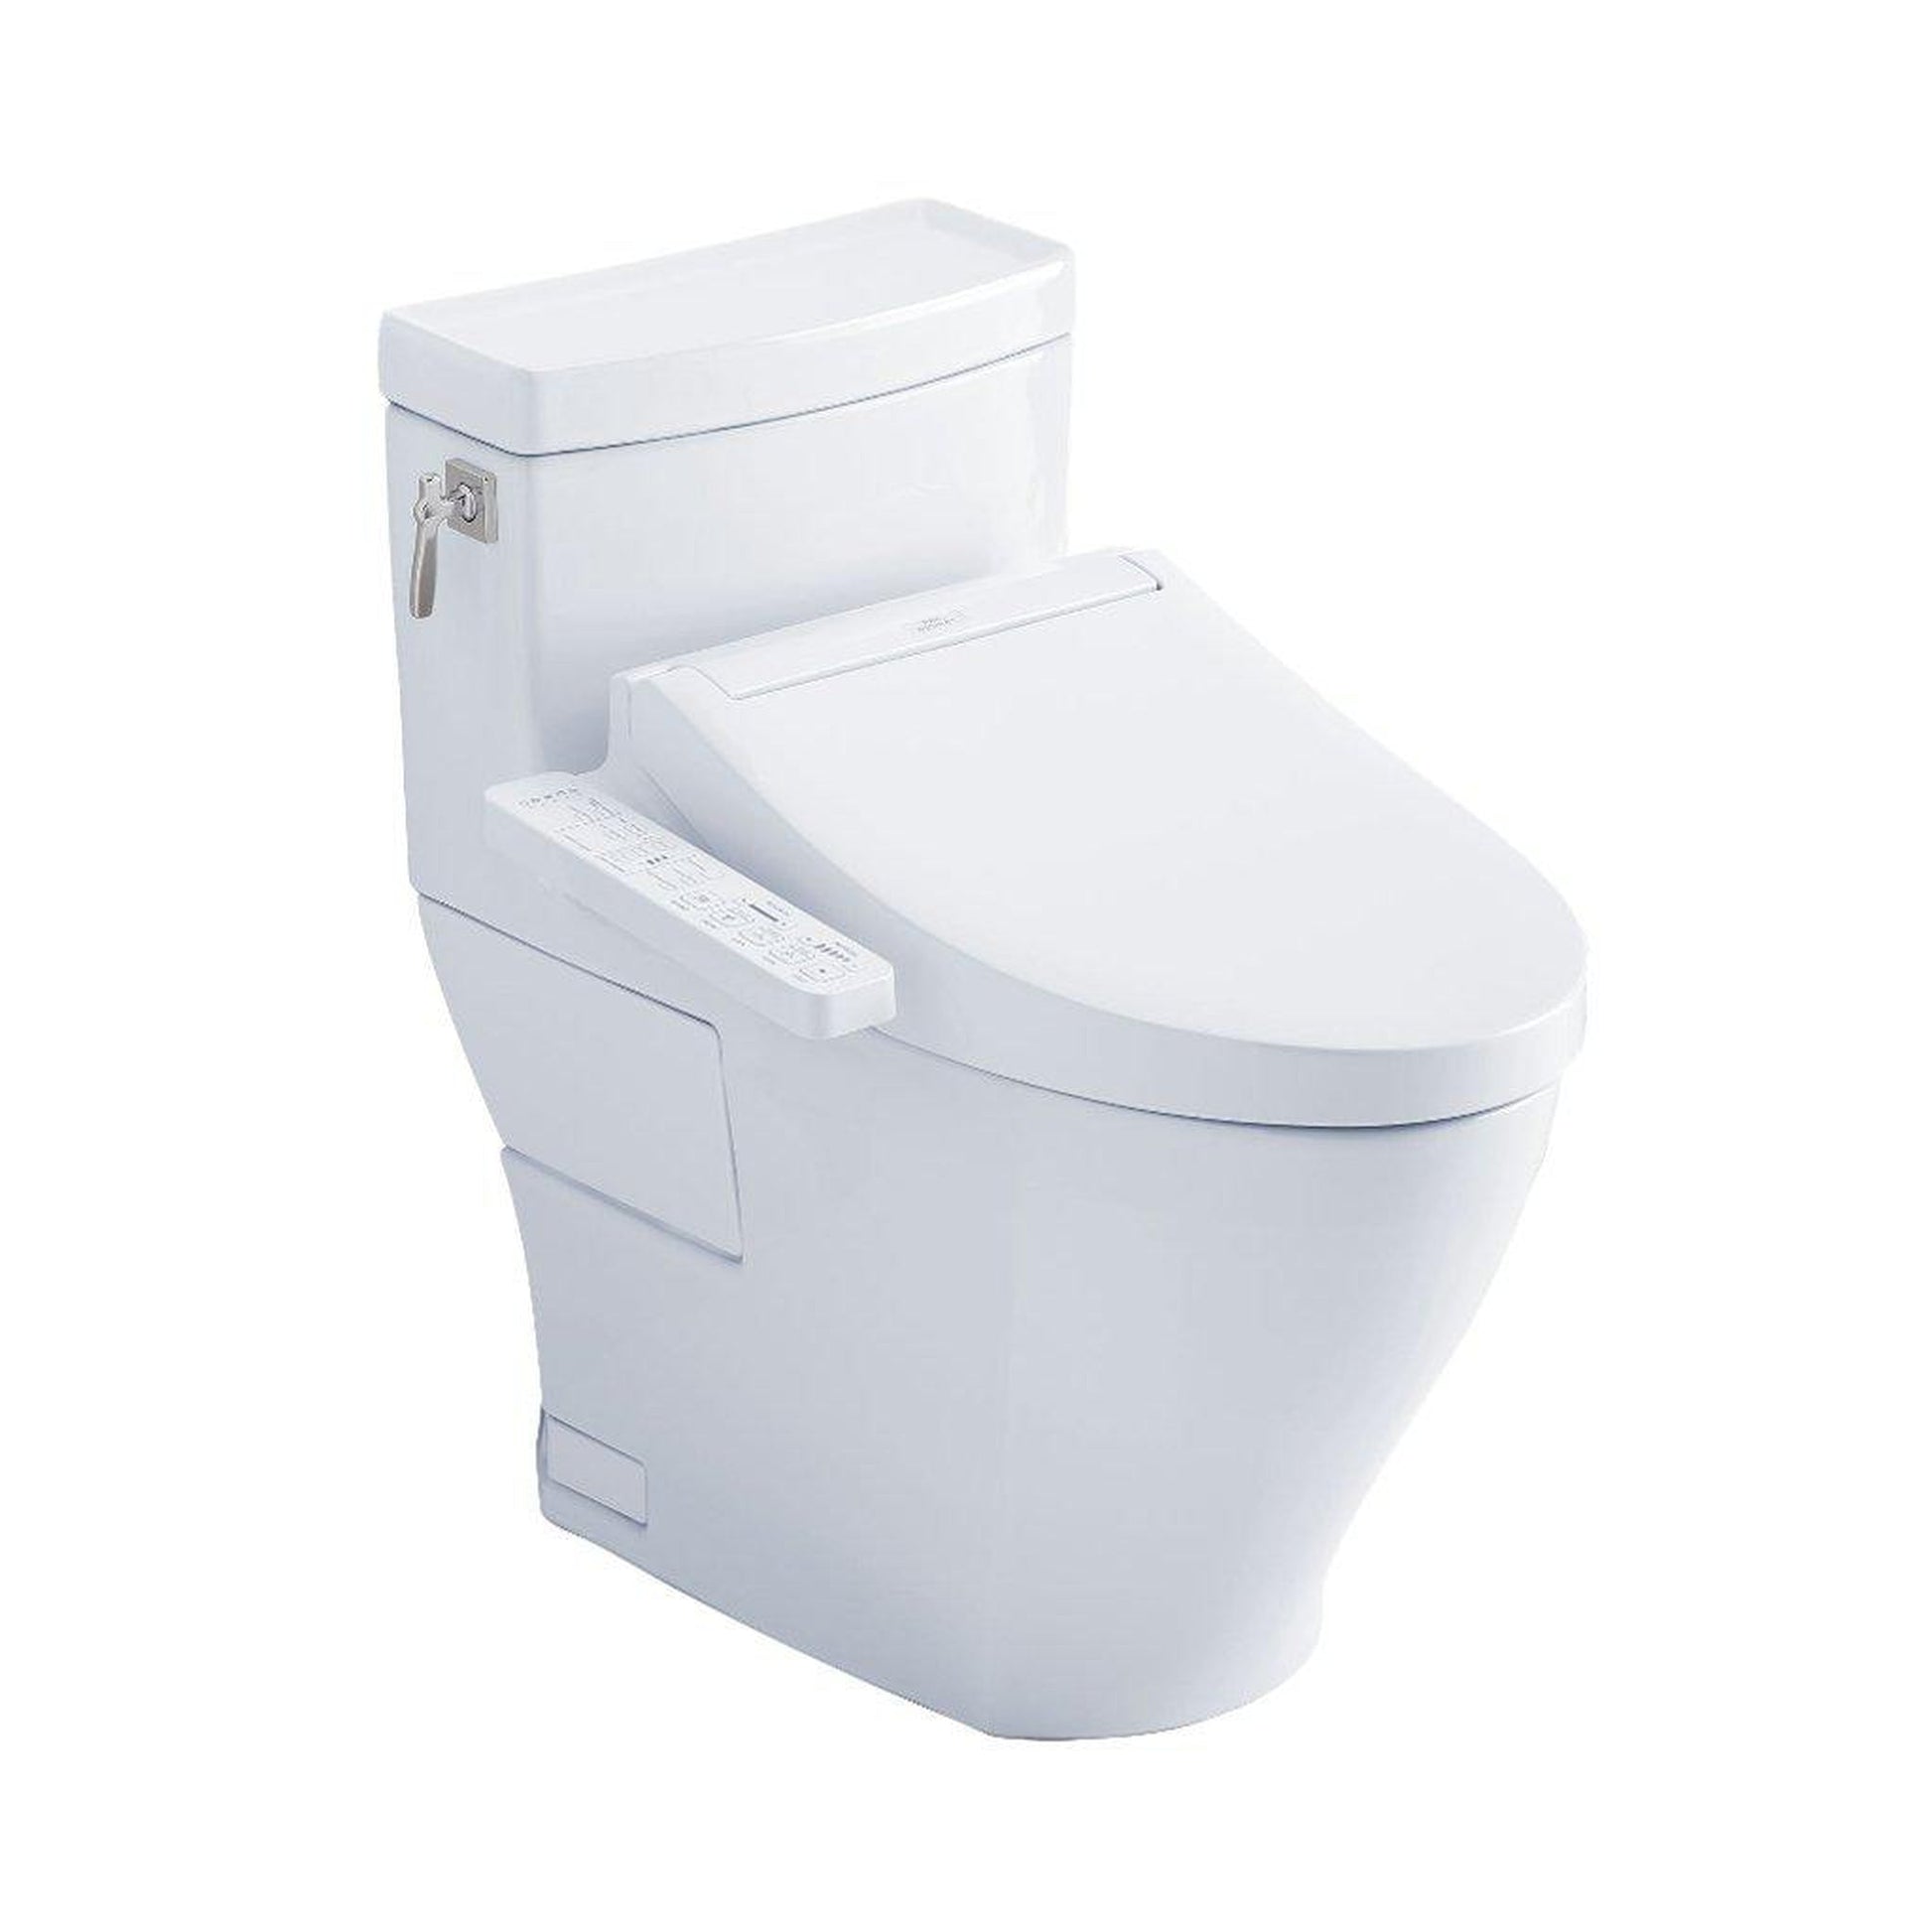 TOTO Aimes White 1.28 GPF One-Piece Elongated Toilet With WASHLET+ C2